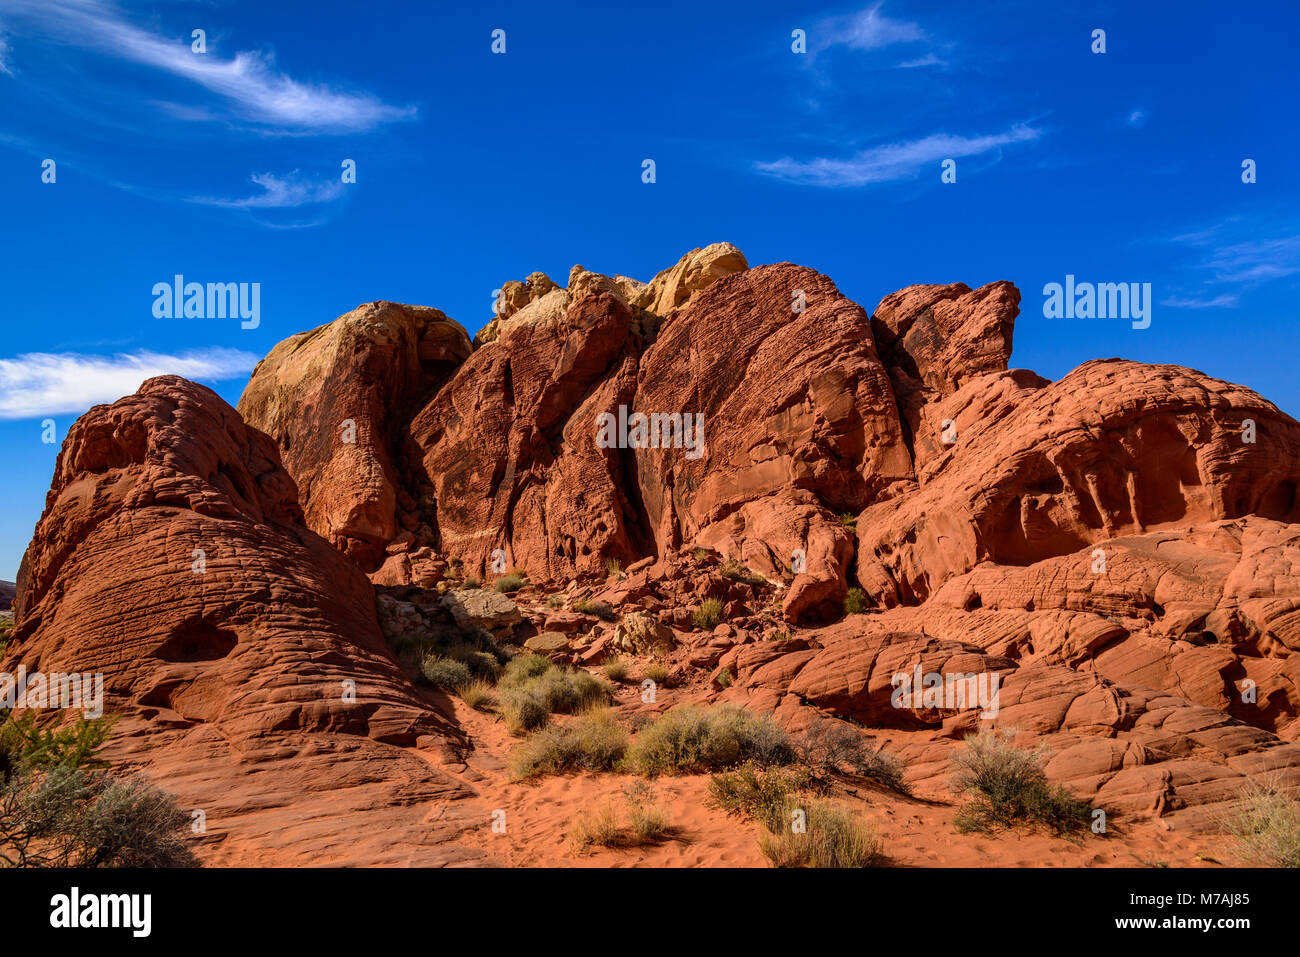 The USA, Nevada, Clark County, Overton, Valley of Fire State Park, rock formations close Rainbow Vista Stock Photo